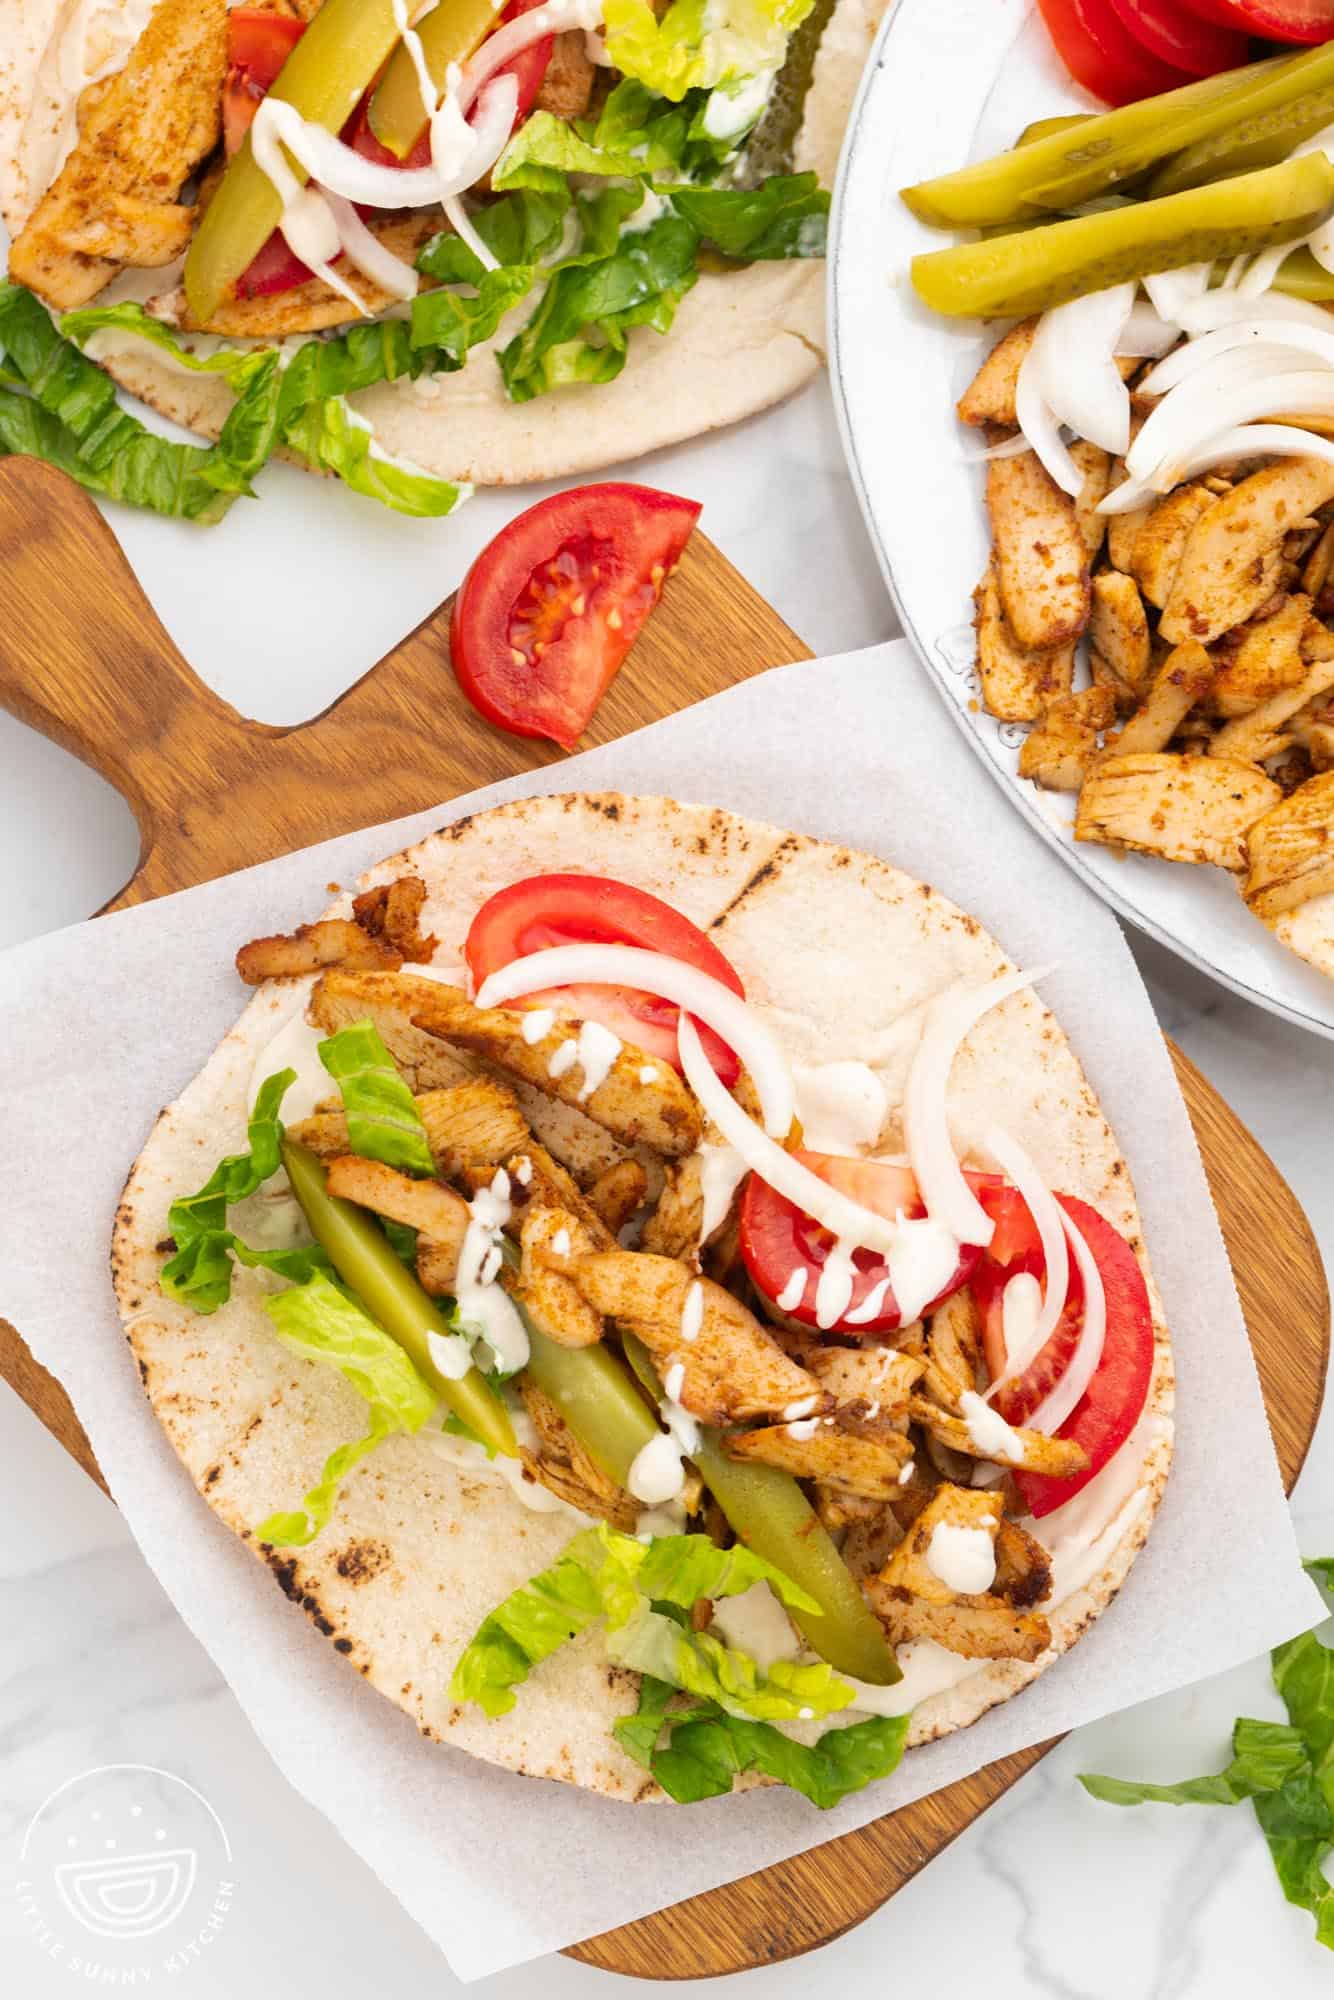 a pita on a cutting board, with chicken shawarma fillings on it.